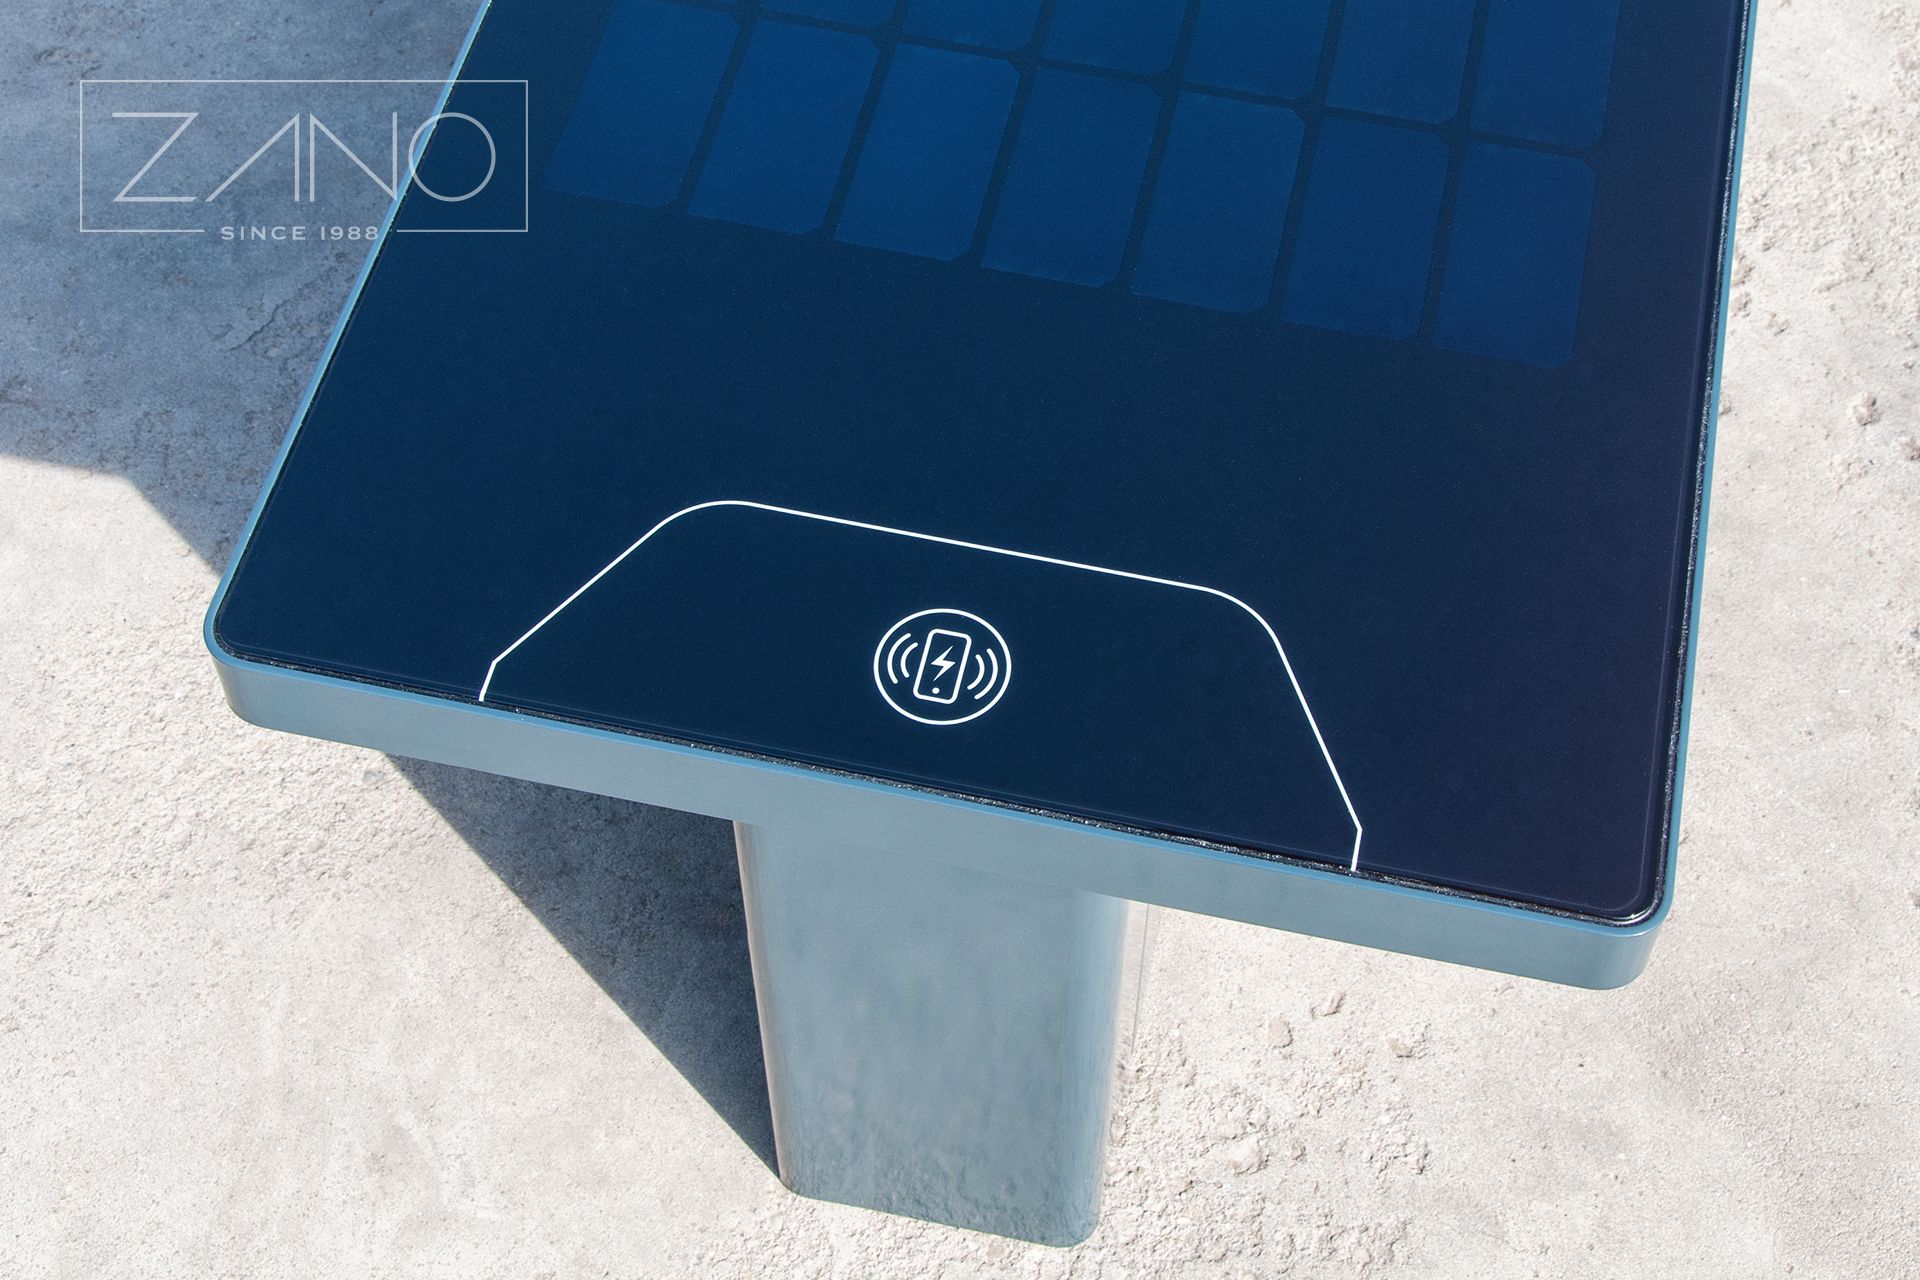 Induction charger for mobile devices in a solar bench